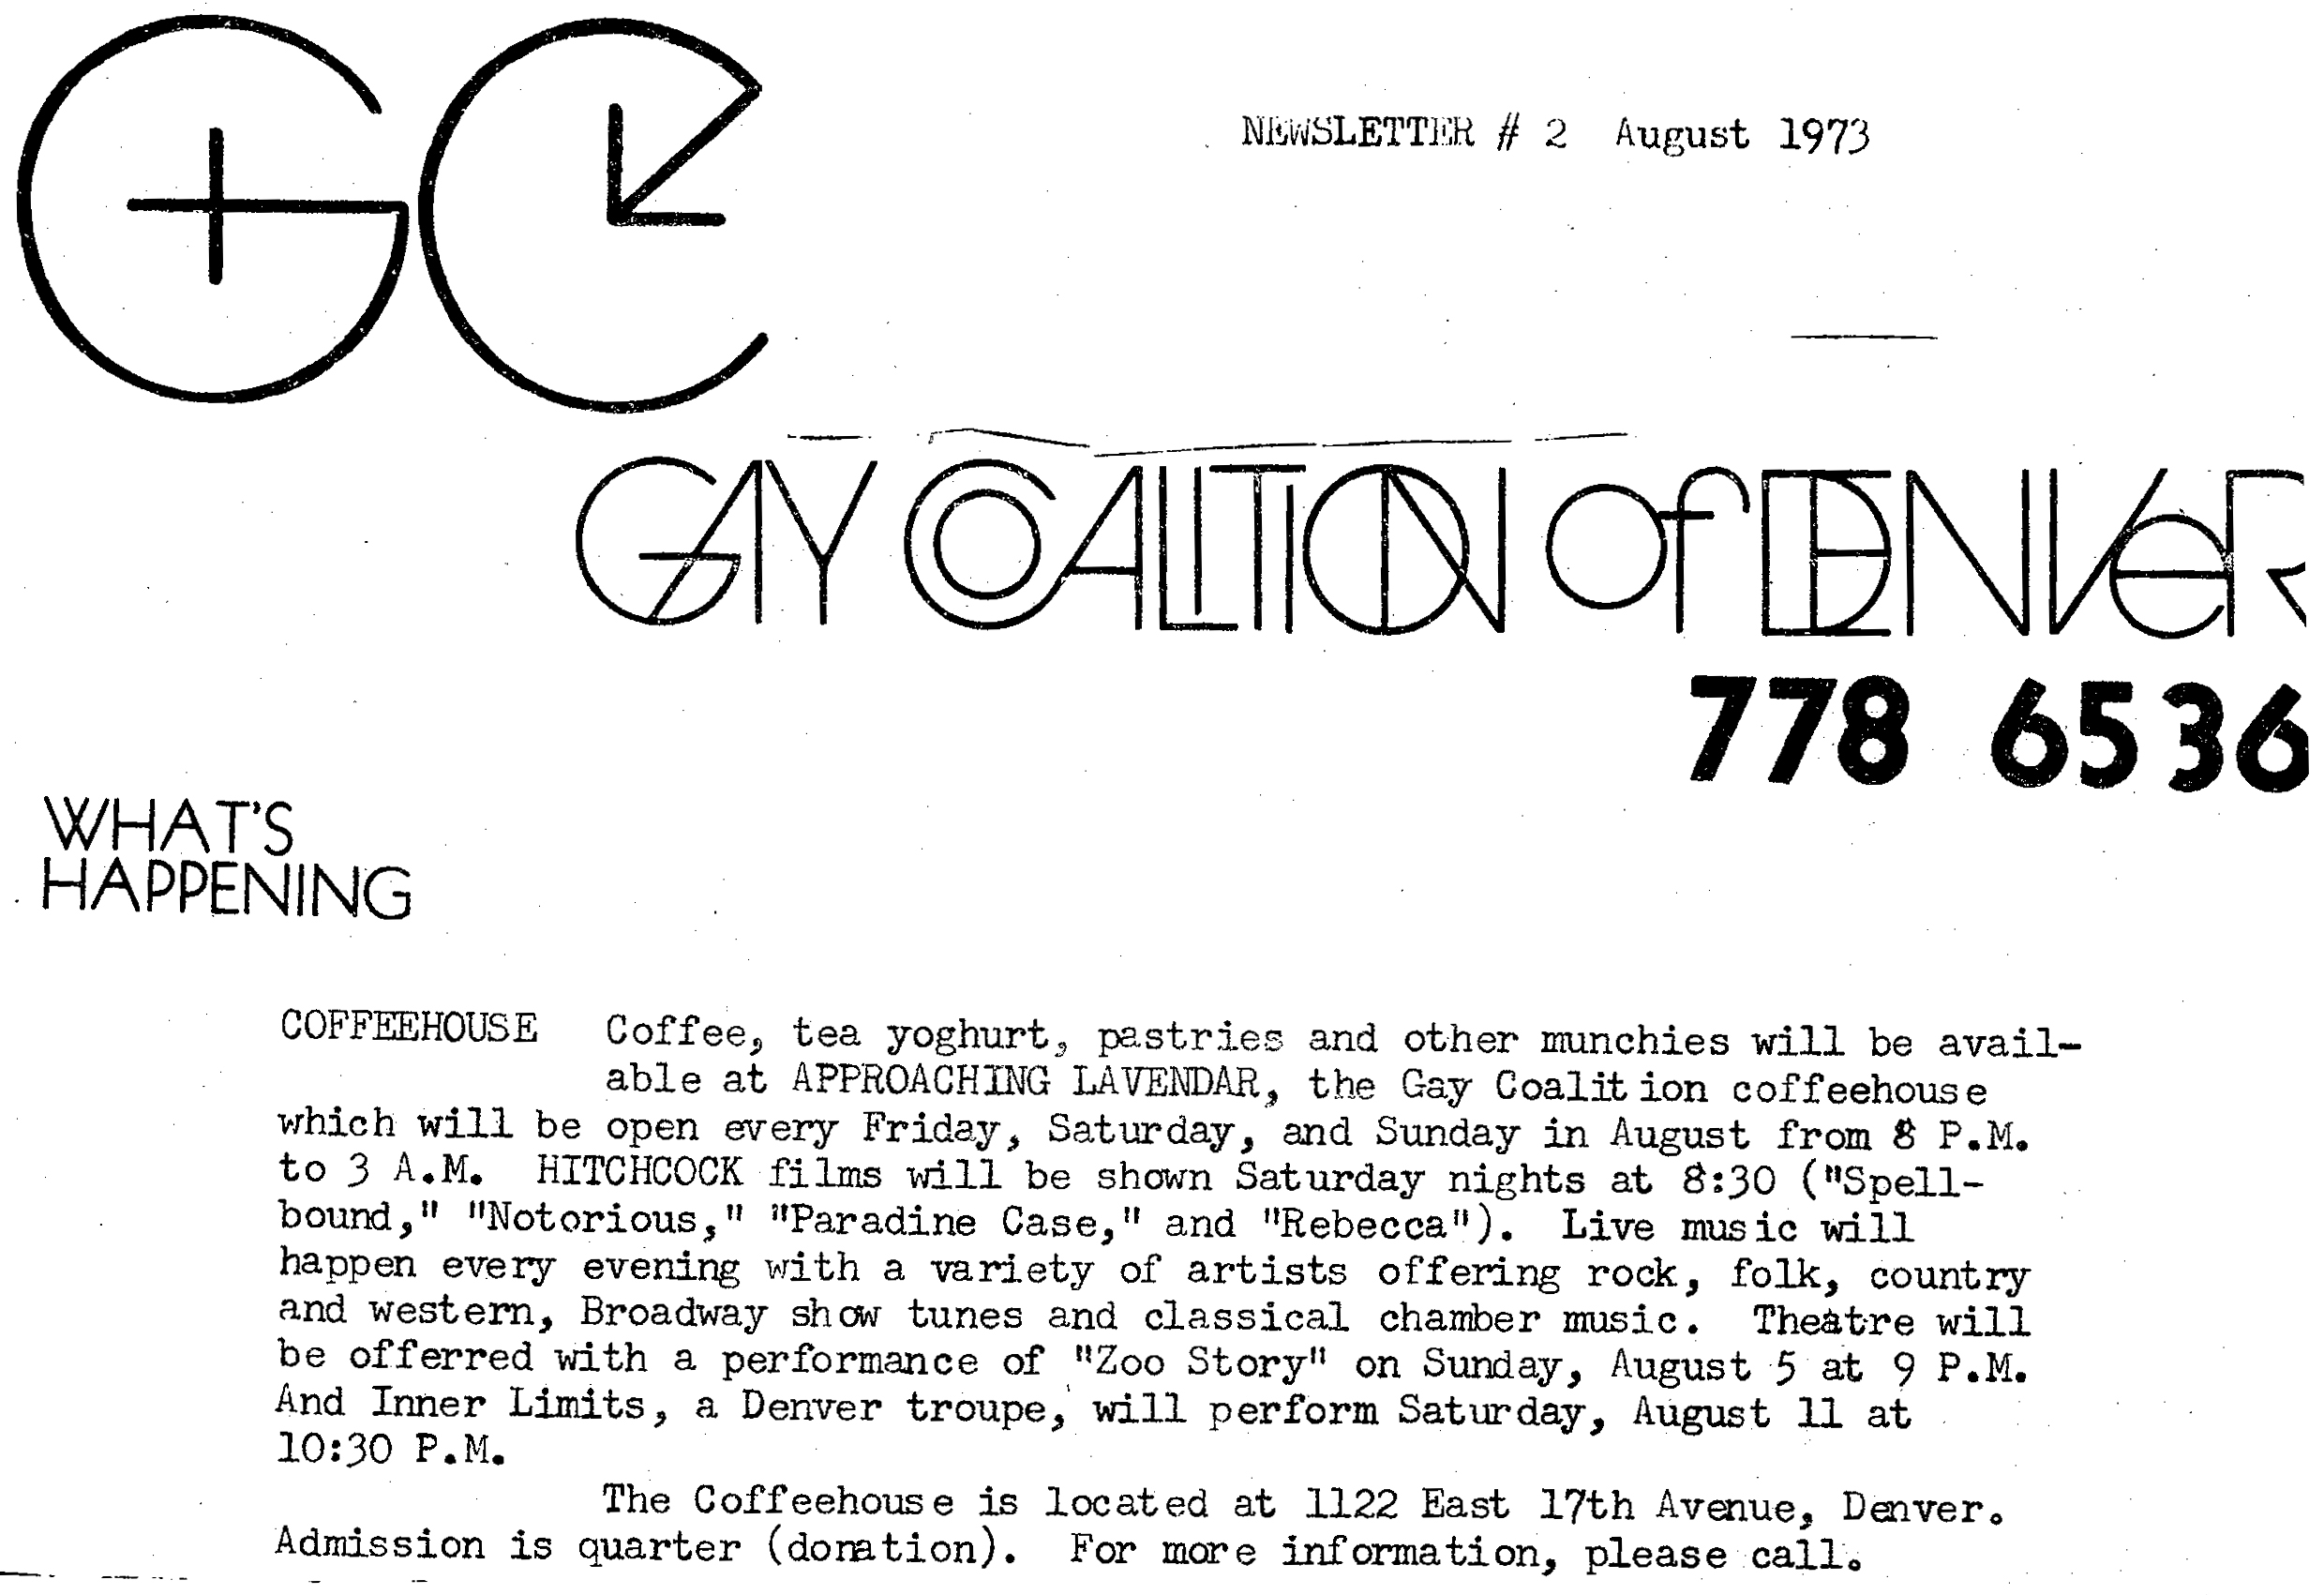 Newsletter #2, August 1973, of the Gay Coalition of Denver